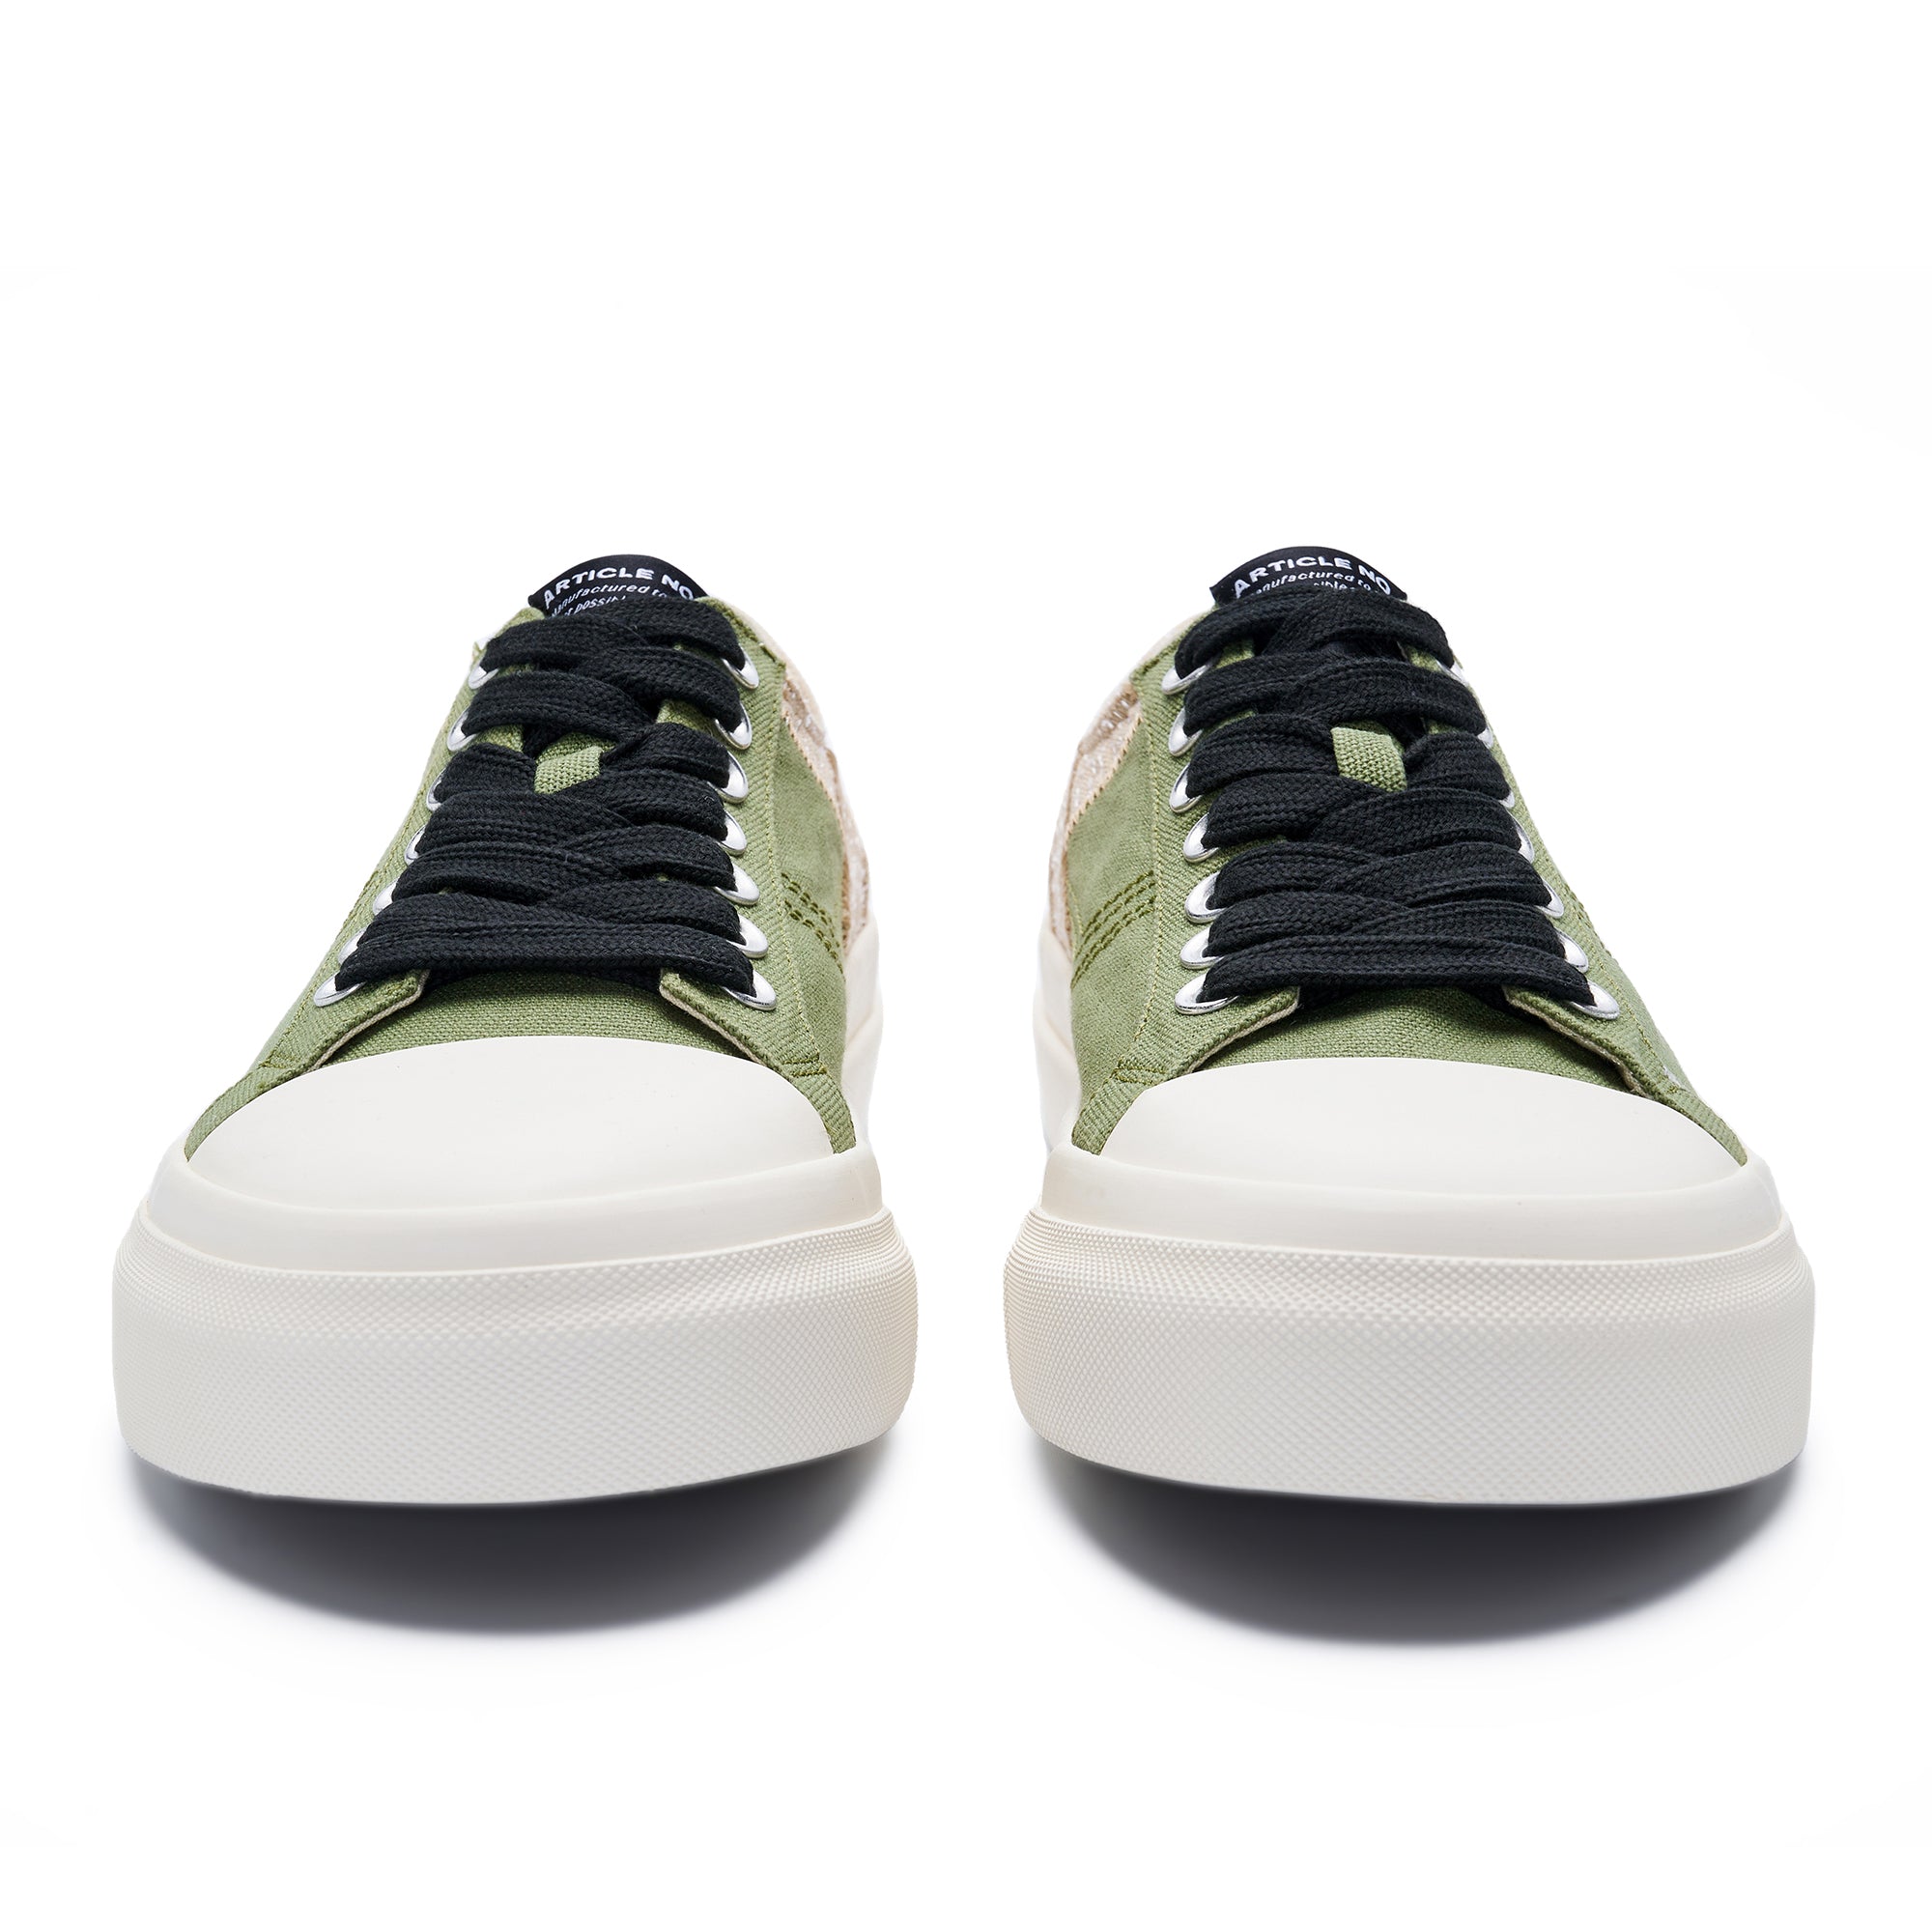 ARTICLE NO. 1007-1008M-23 ARMY GREEN PATCHWORK LOW-TOP VULCANIZED